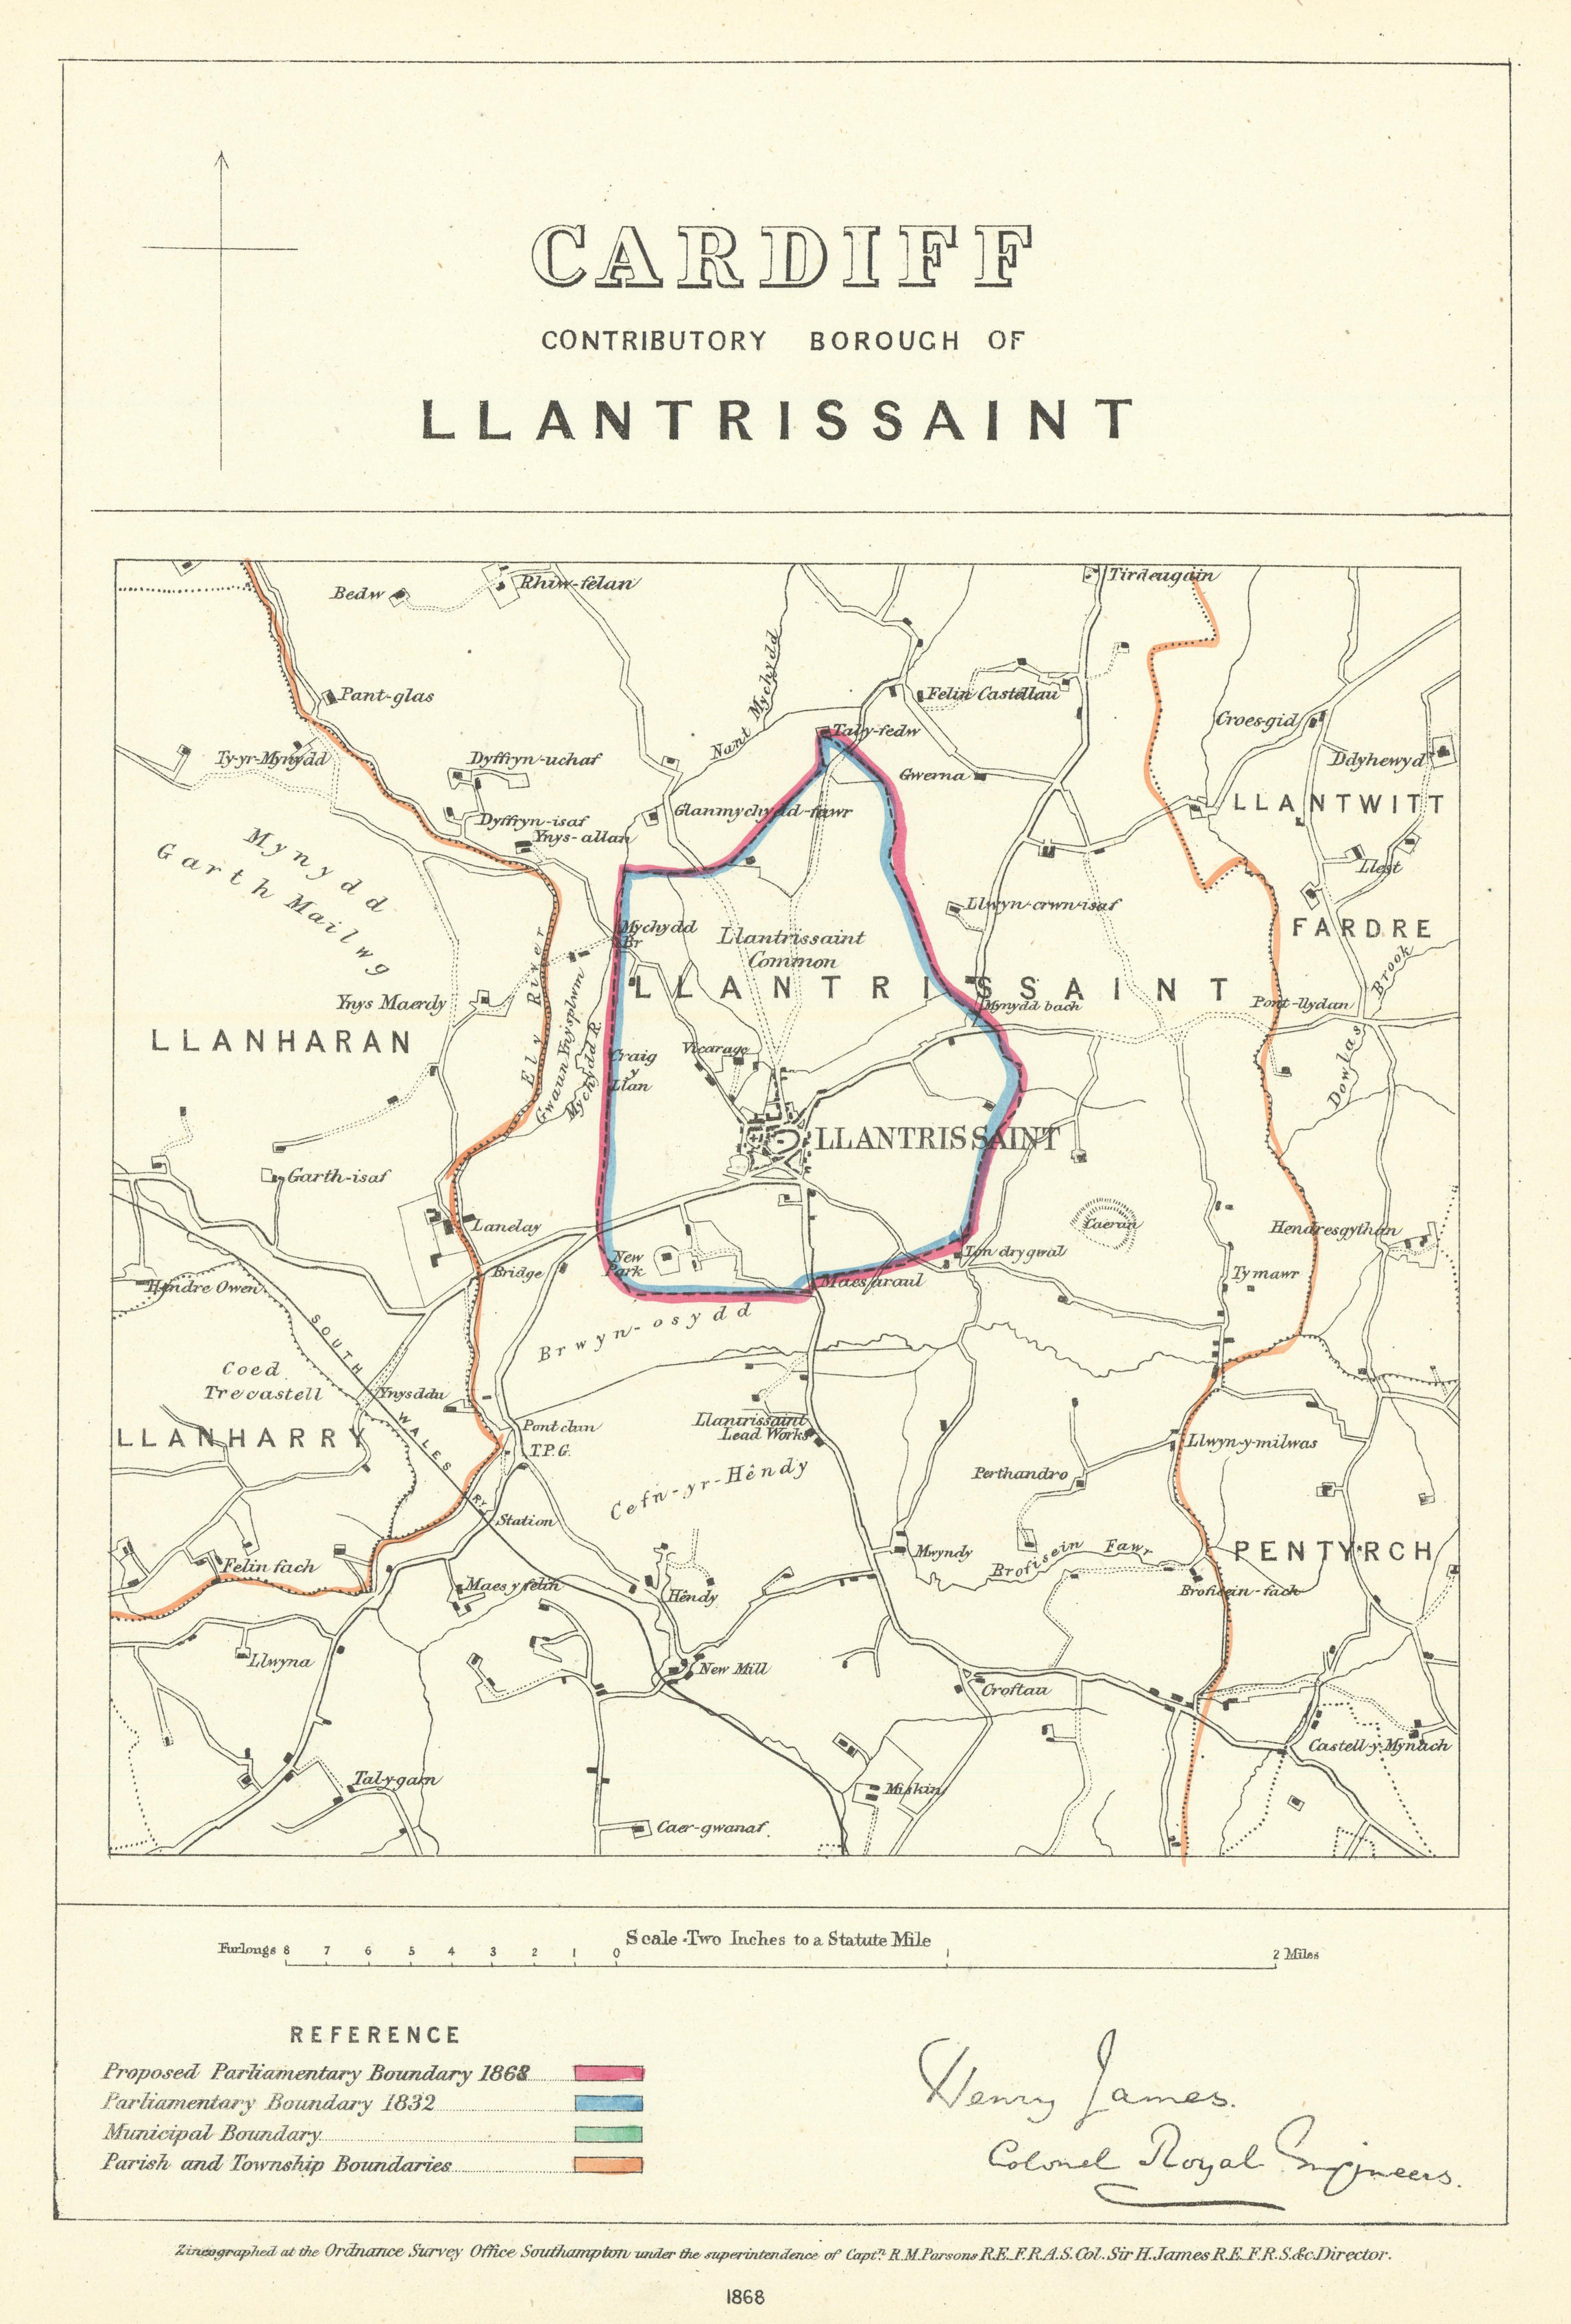 Associate Product Cardiff Contrib'y Borough of Llantrisant. JAMES. Boundary Commission 1868 map